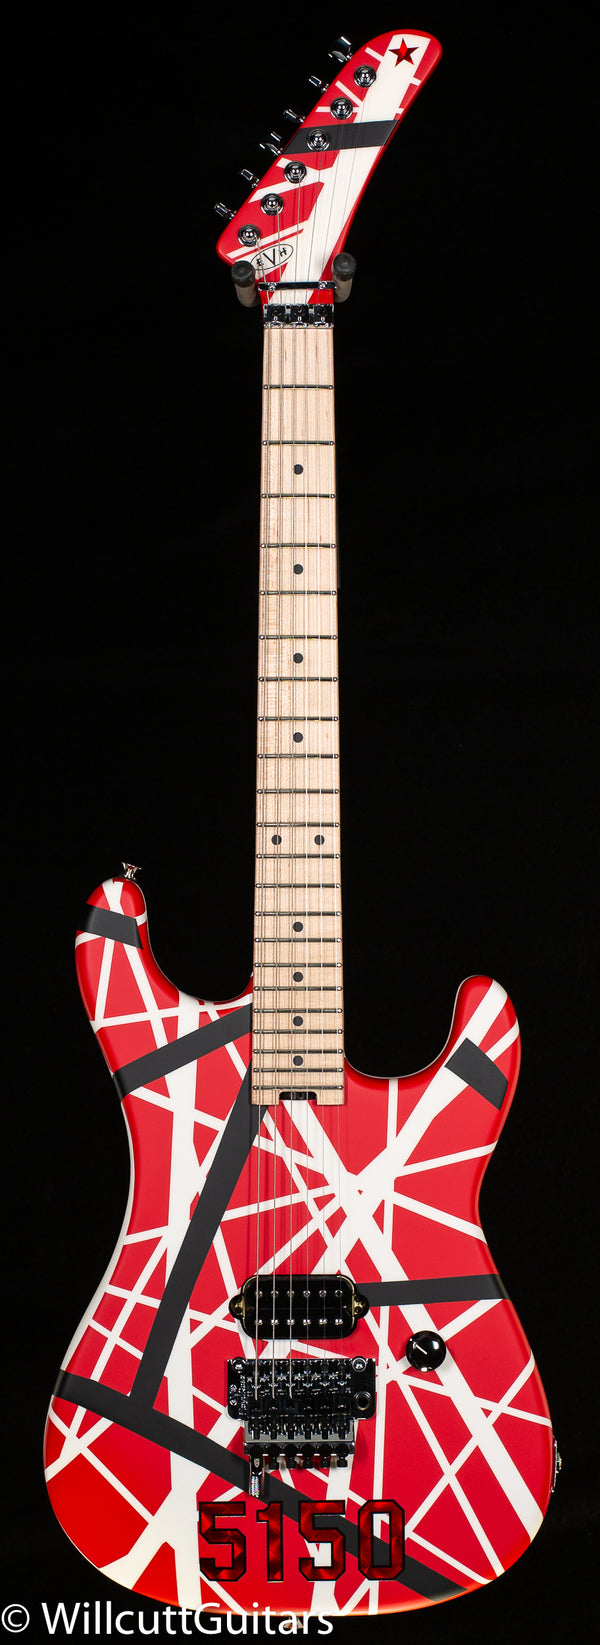 Red　Willcutt　and　Guitars　EVH　with　Fingerboard　Str　5150　Striped　Series　White　Maple　Black